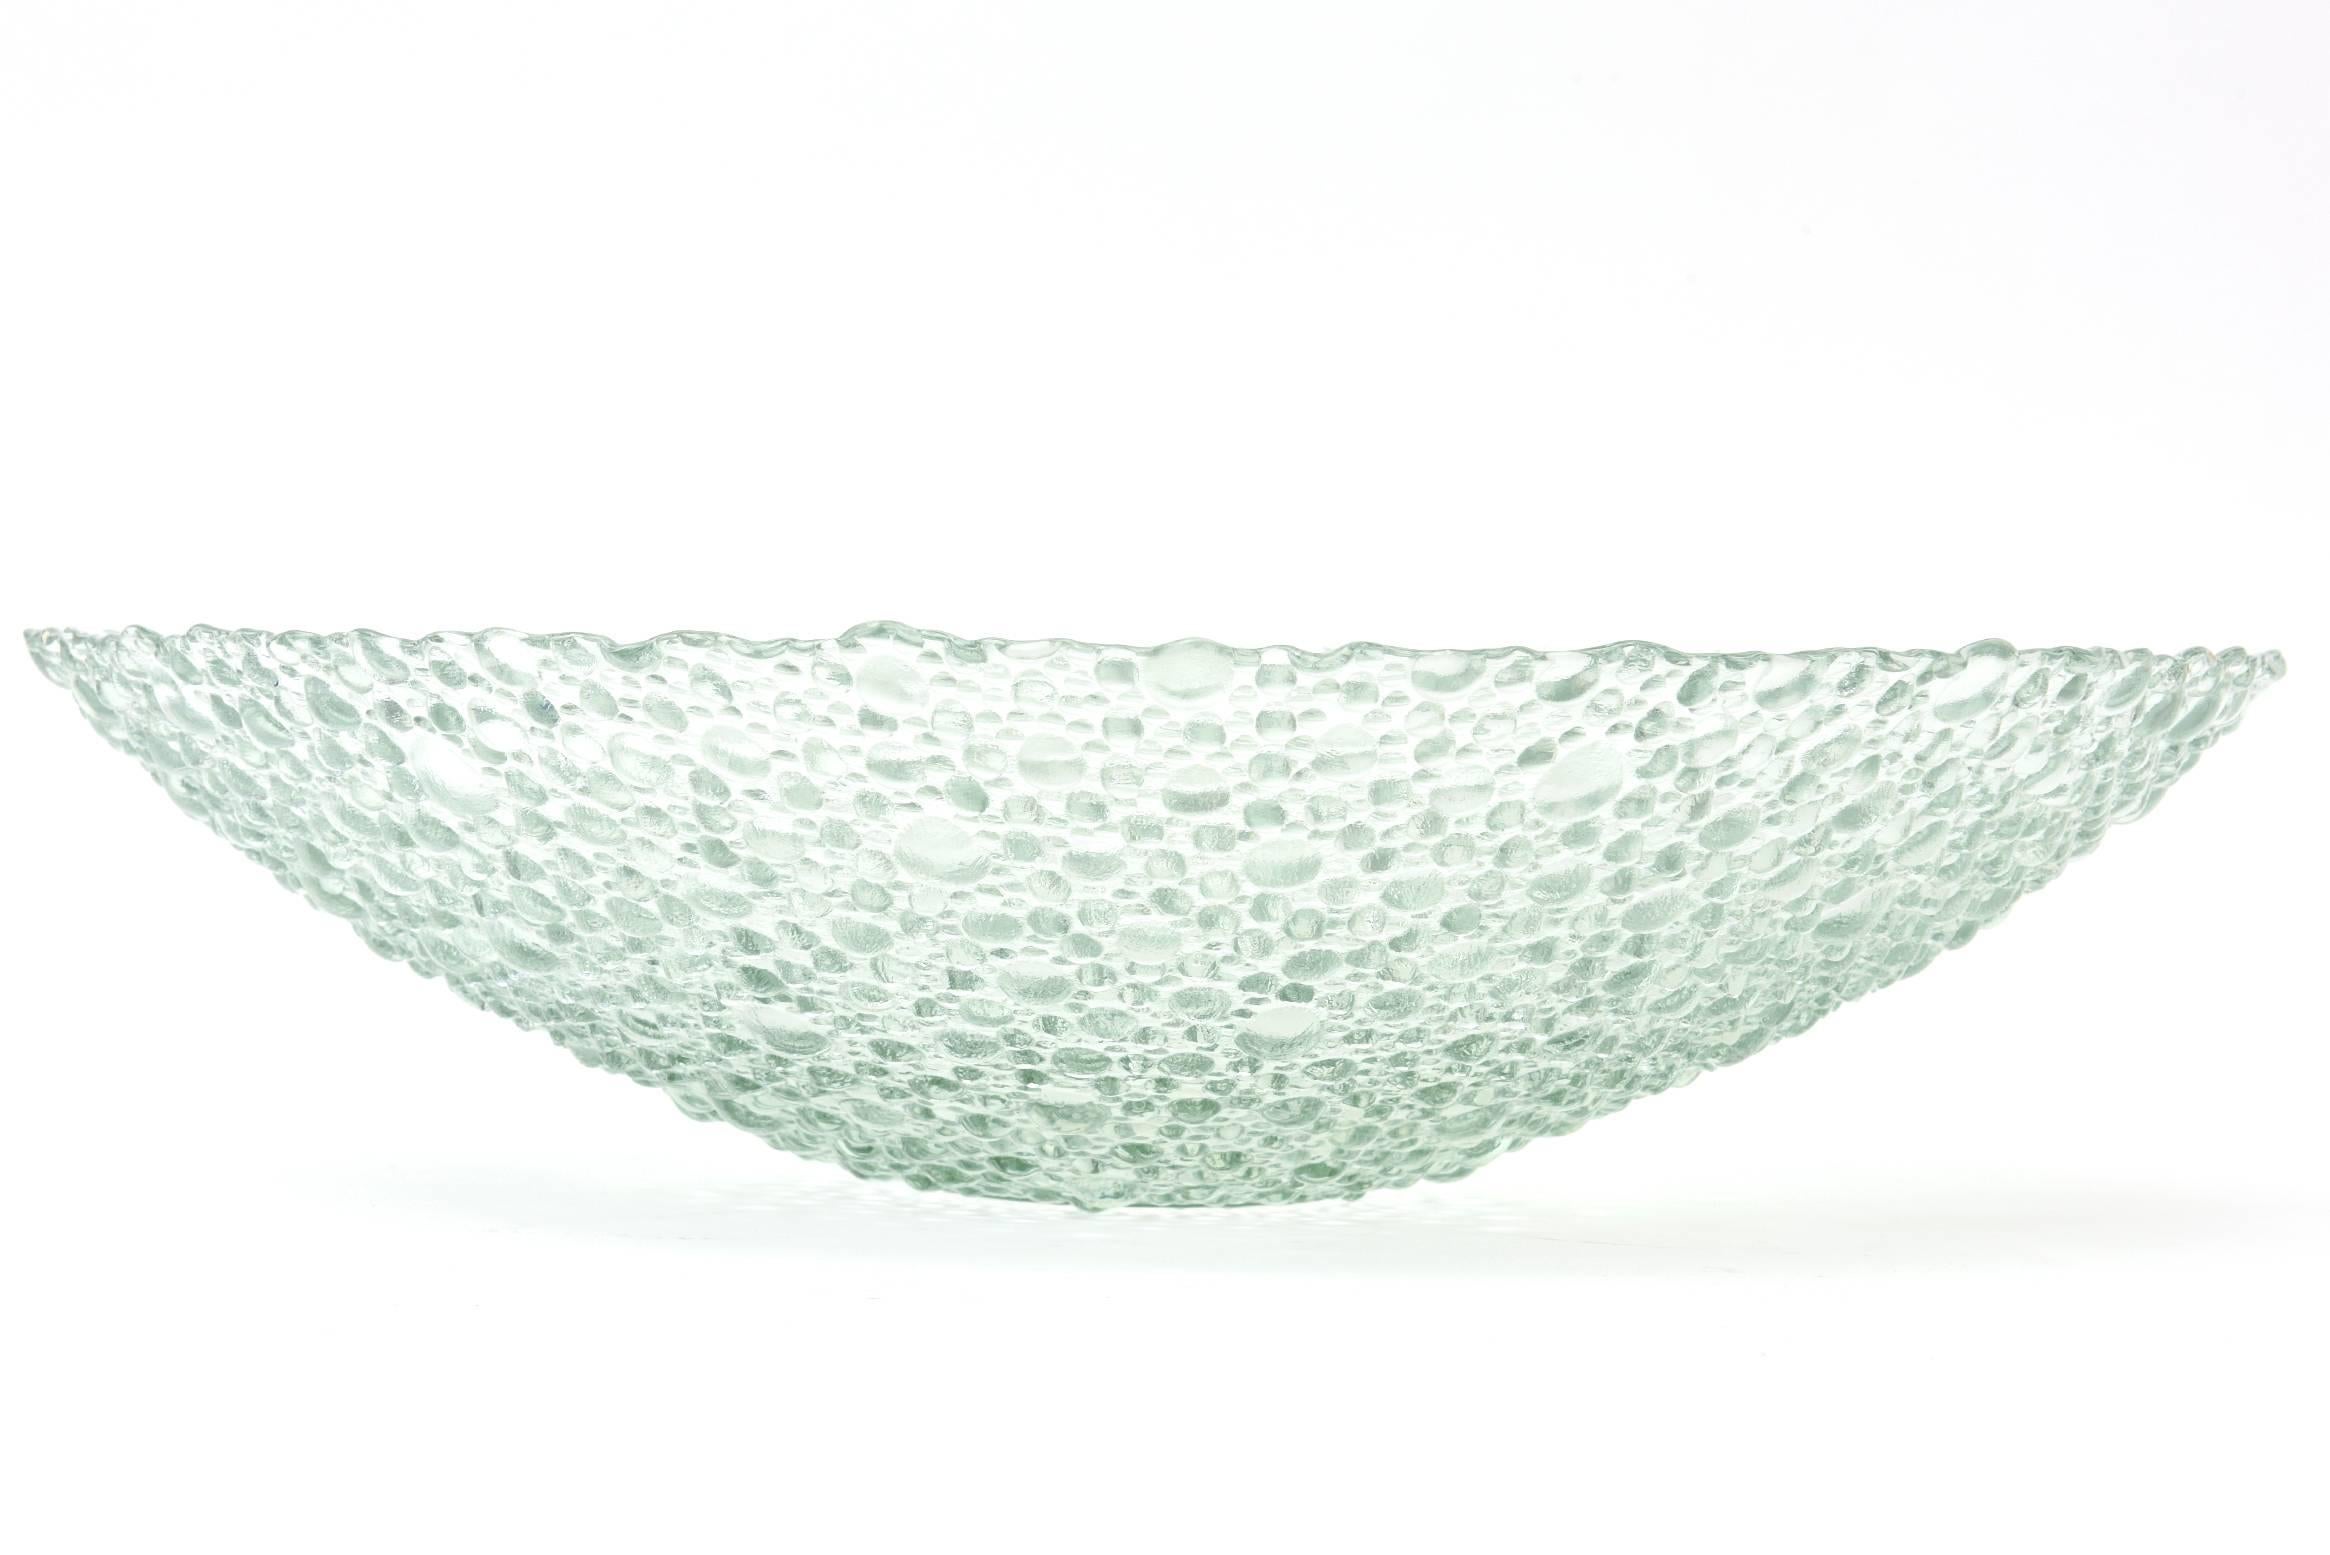 This large and lovely Scandinavian vintage glass bubble clear bowl is textural on the outside. It has great scale and adds a sculptural dimensional with the raised bubbles. It is evocative of the style of Iittala Thule that was originally designed